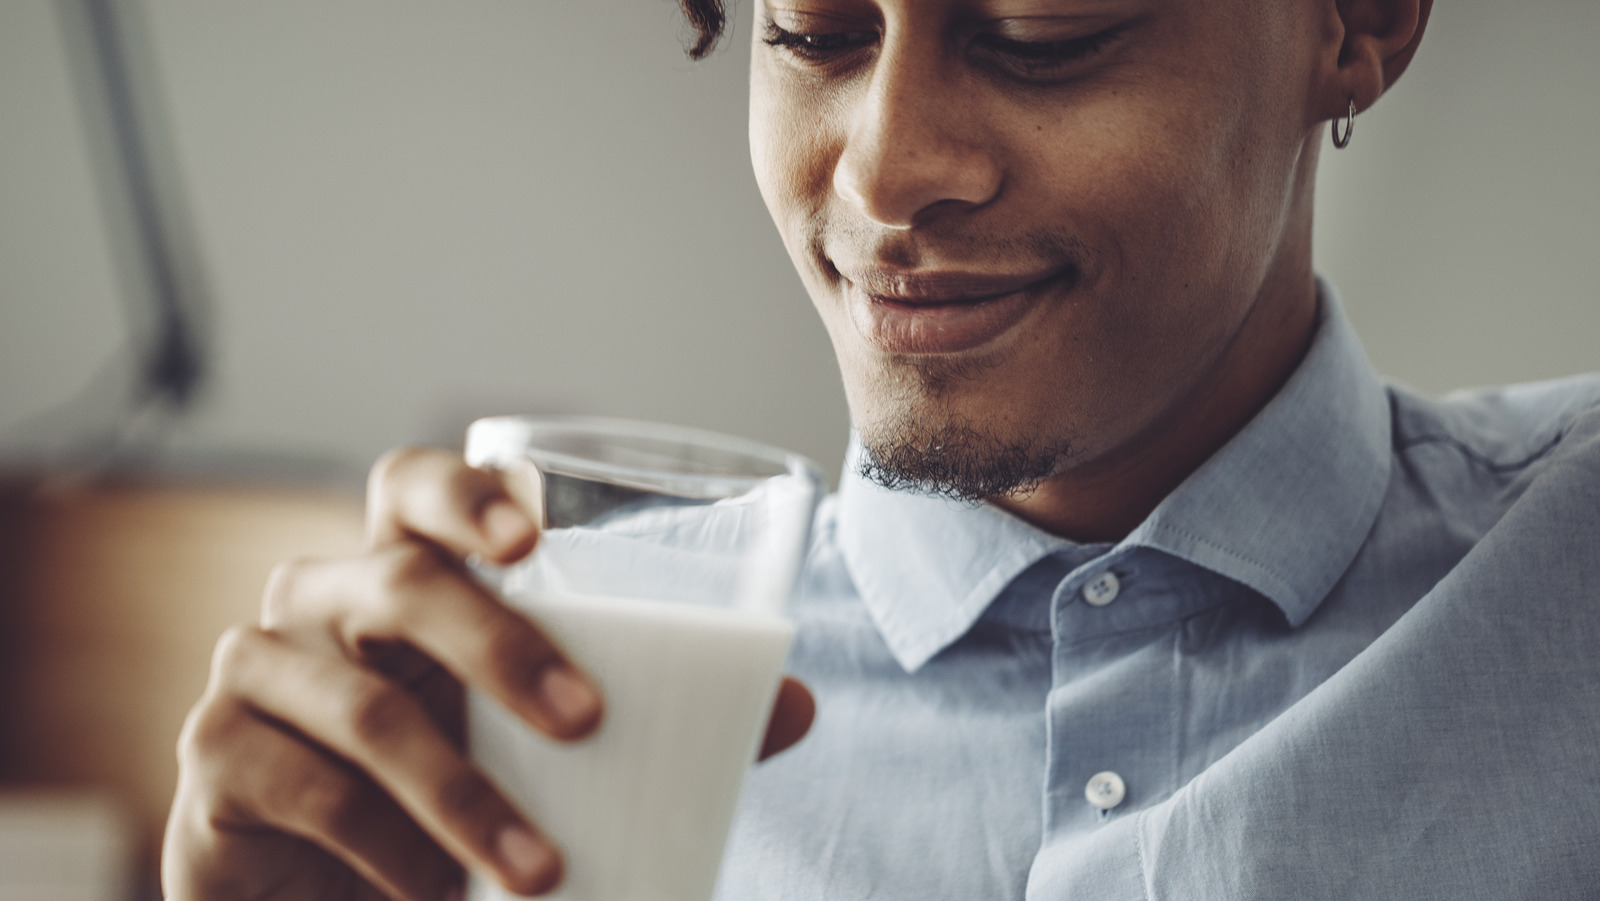 Drinking Milk Has An Unexpected Effect On Your Mood